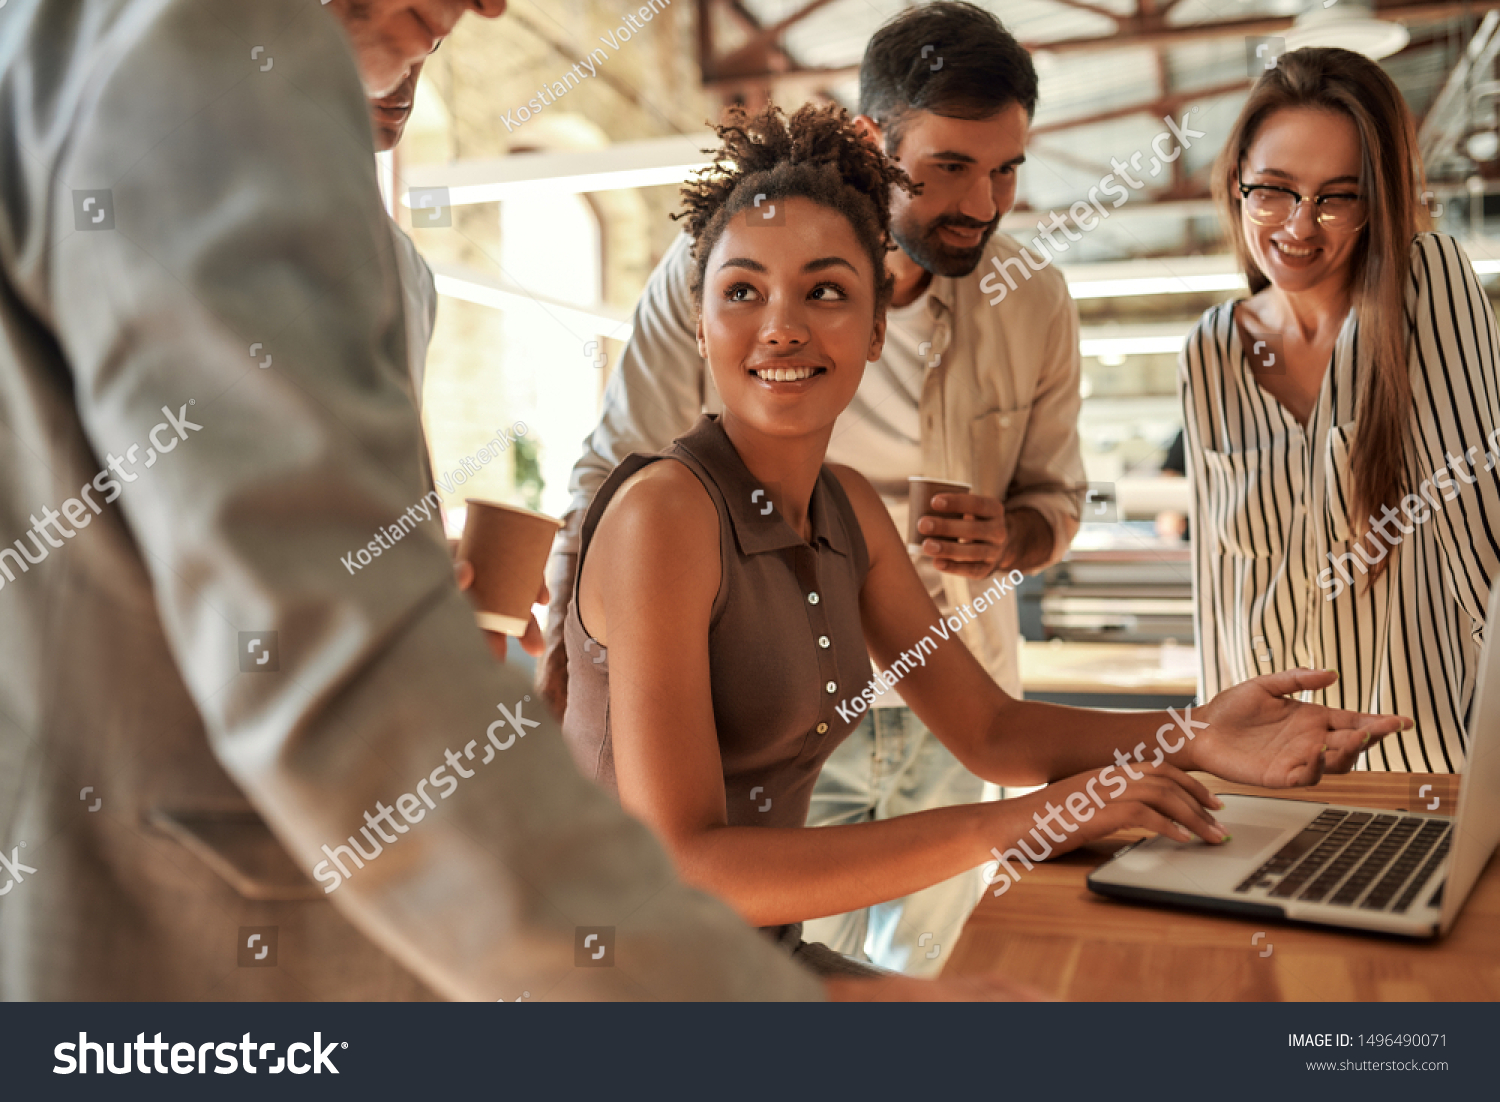 Working together. Young and cheerful afro american woman using laptop and discussing something with colleagues while sitting in the modern office. Teamwork. Office life #1496490071